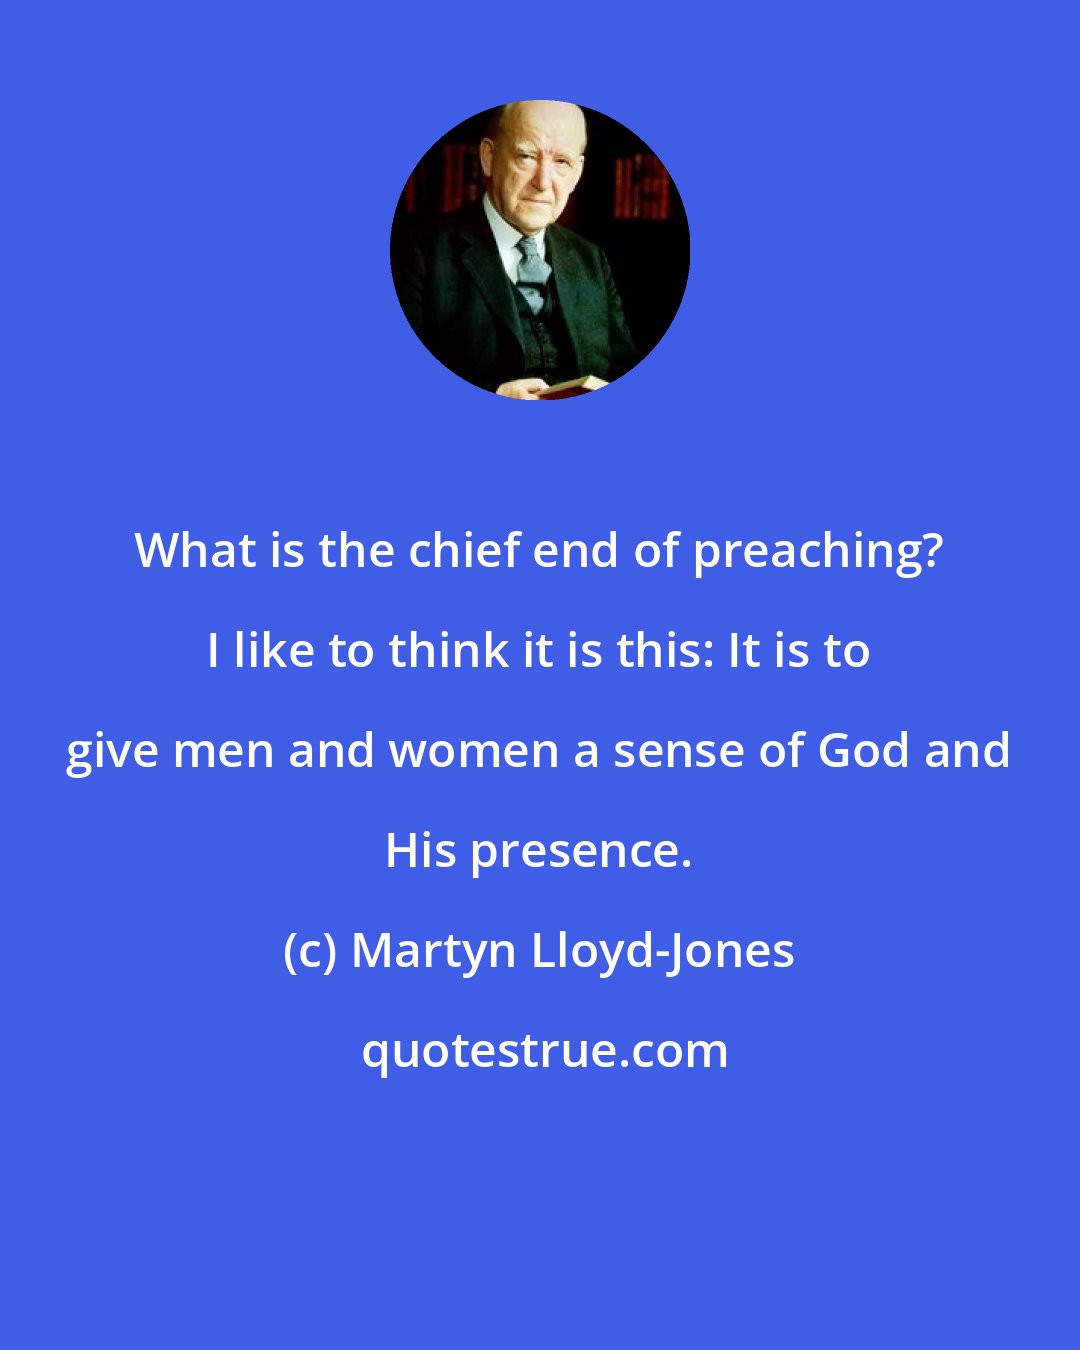 Martyn Lloyd-Jones: What is the chief end of preaching? I like to think it is this: It is to give men and women a sense of God and His presence.